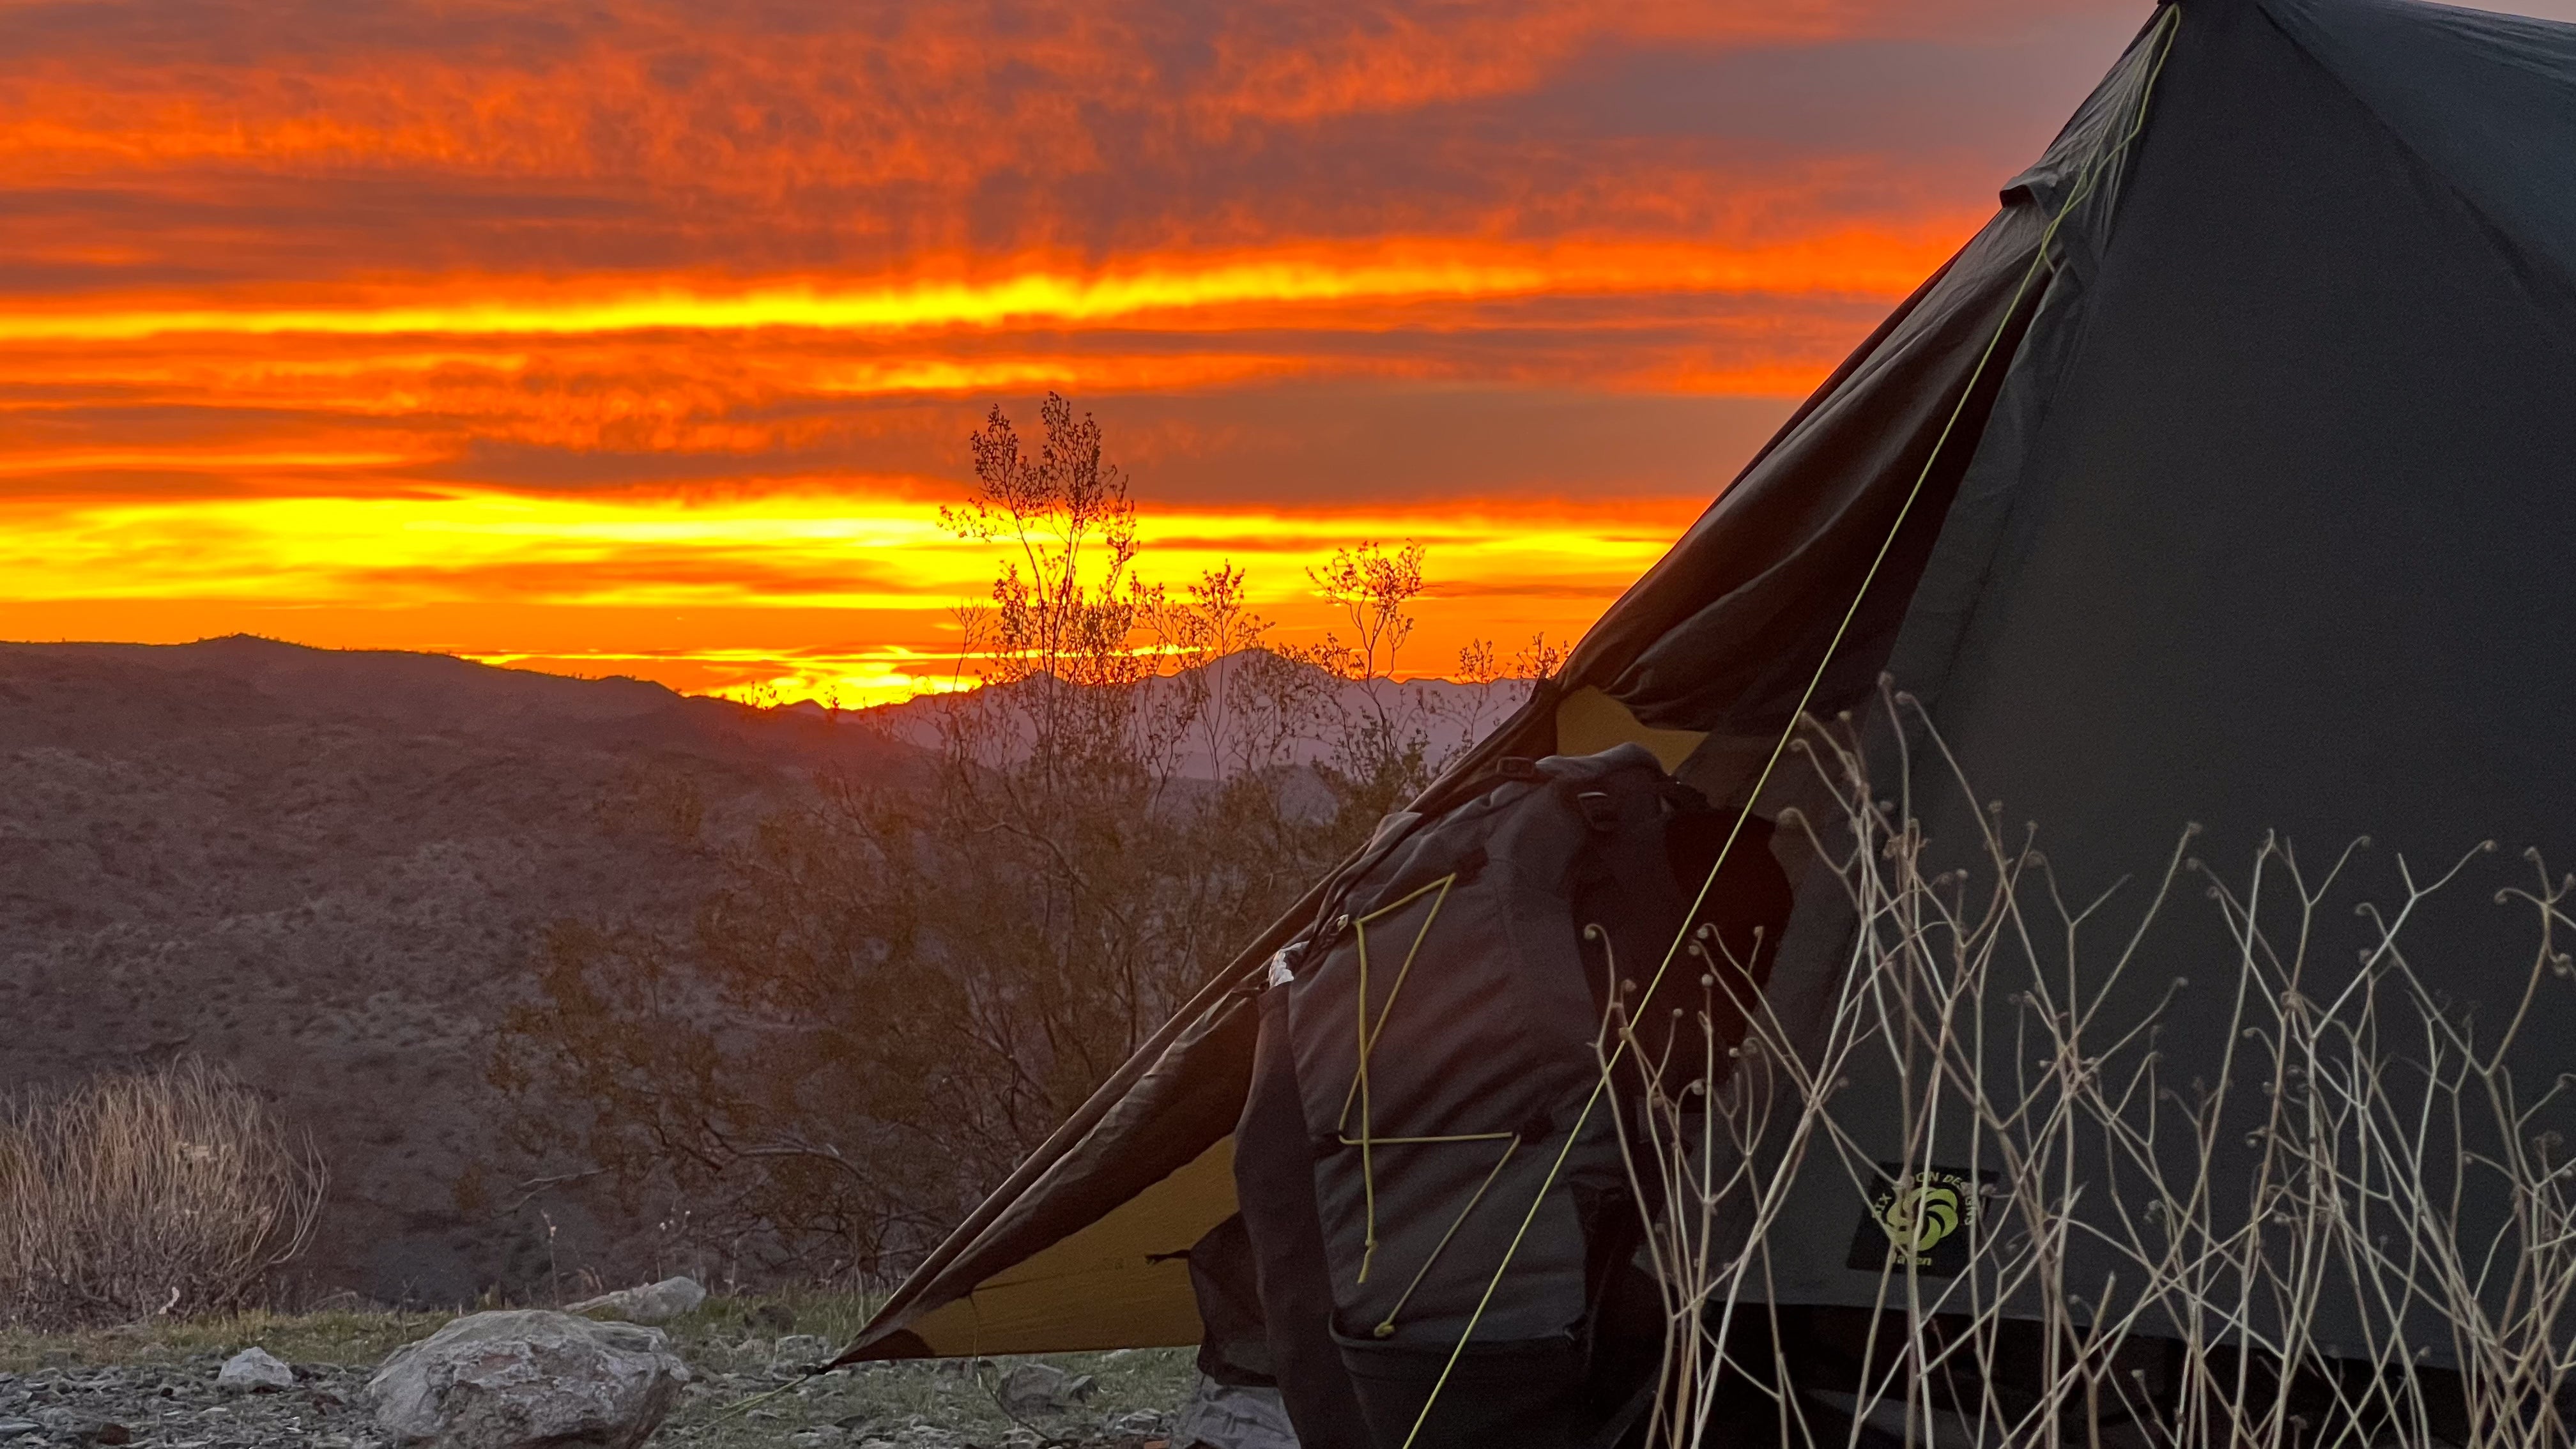 How to Choose a 2-Person Thru-Hiking Tent by Mandy "Veggie" Redpath